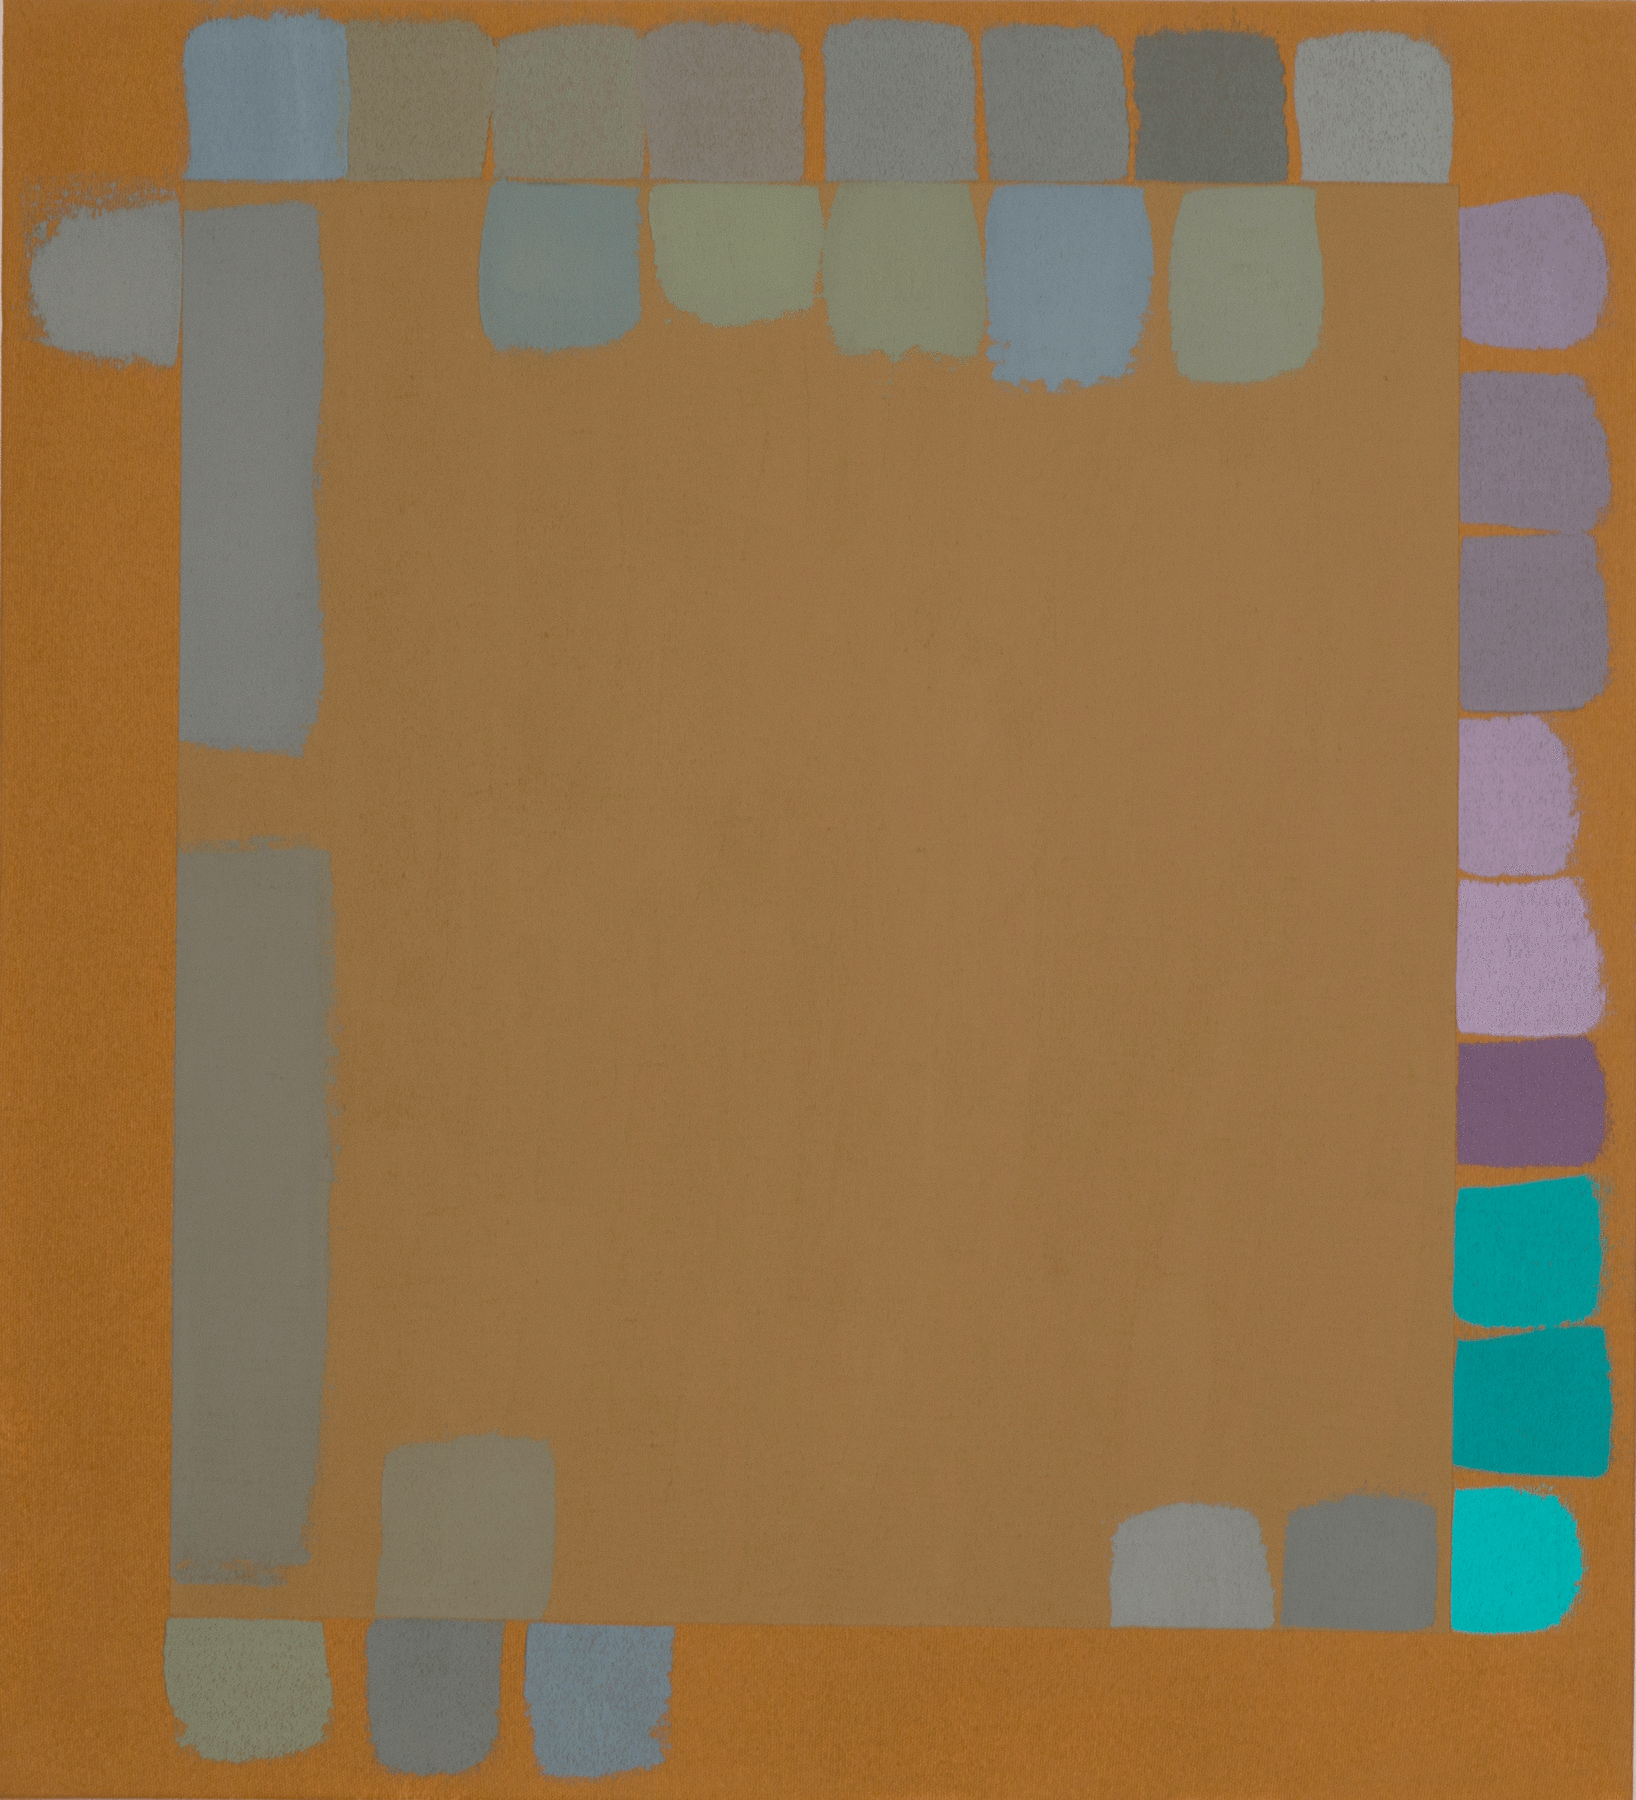 Painting by Doug Ohlson with turquoise and purple in varying hues brushed along the edge of the square canvas over a brown ground.